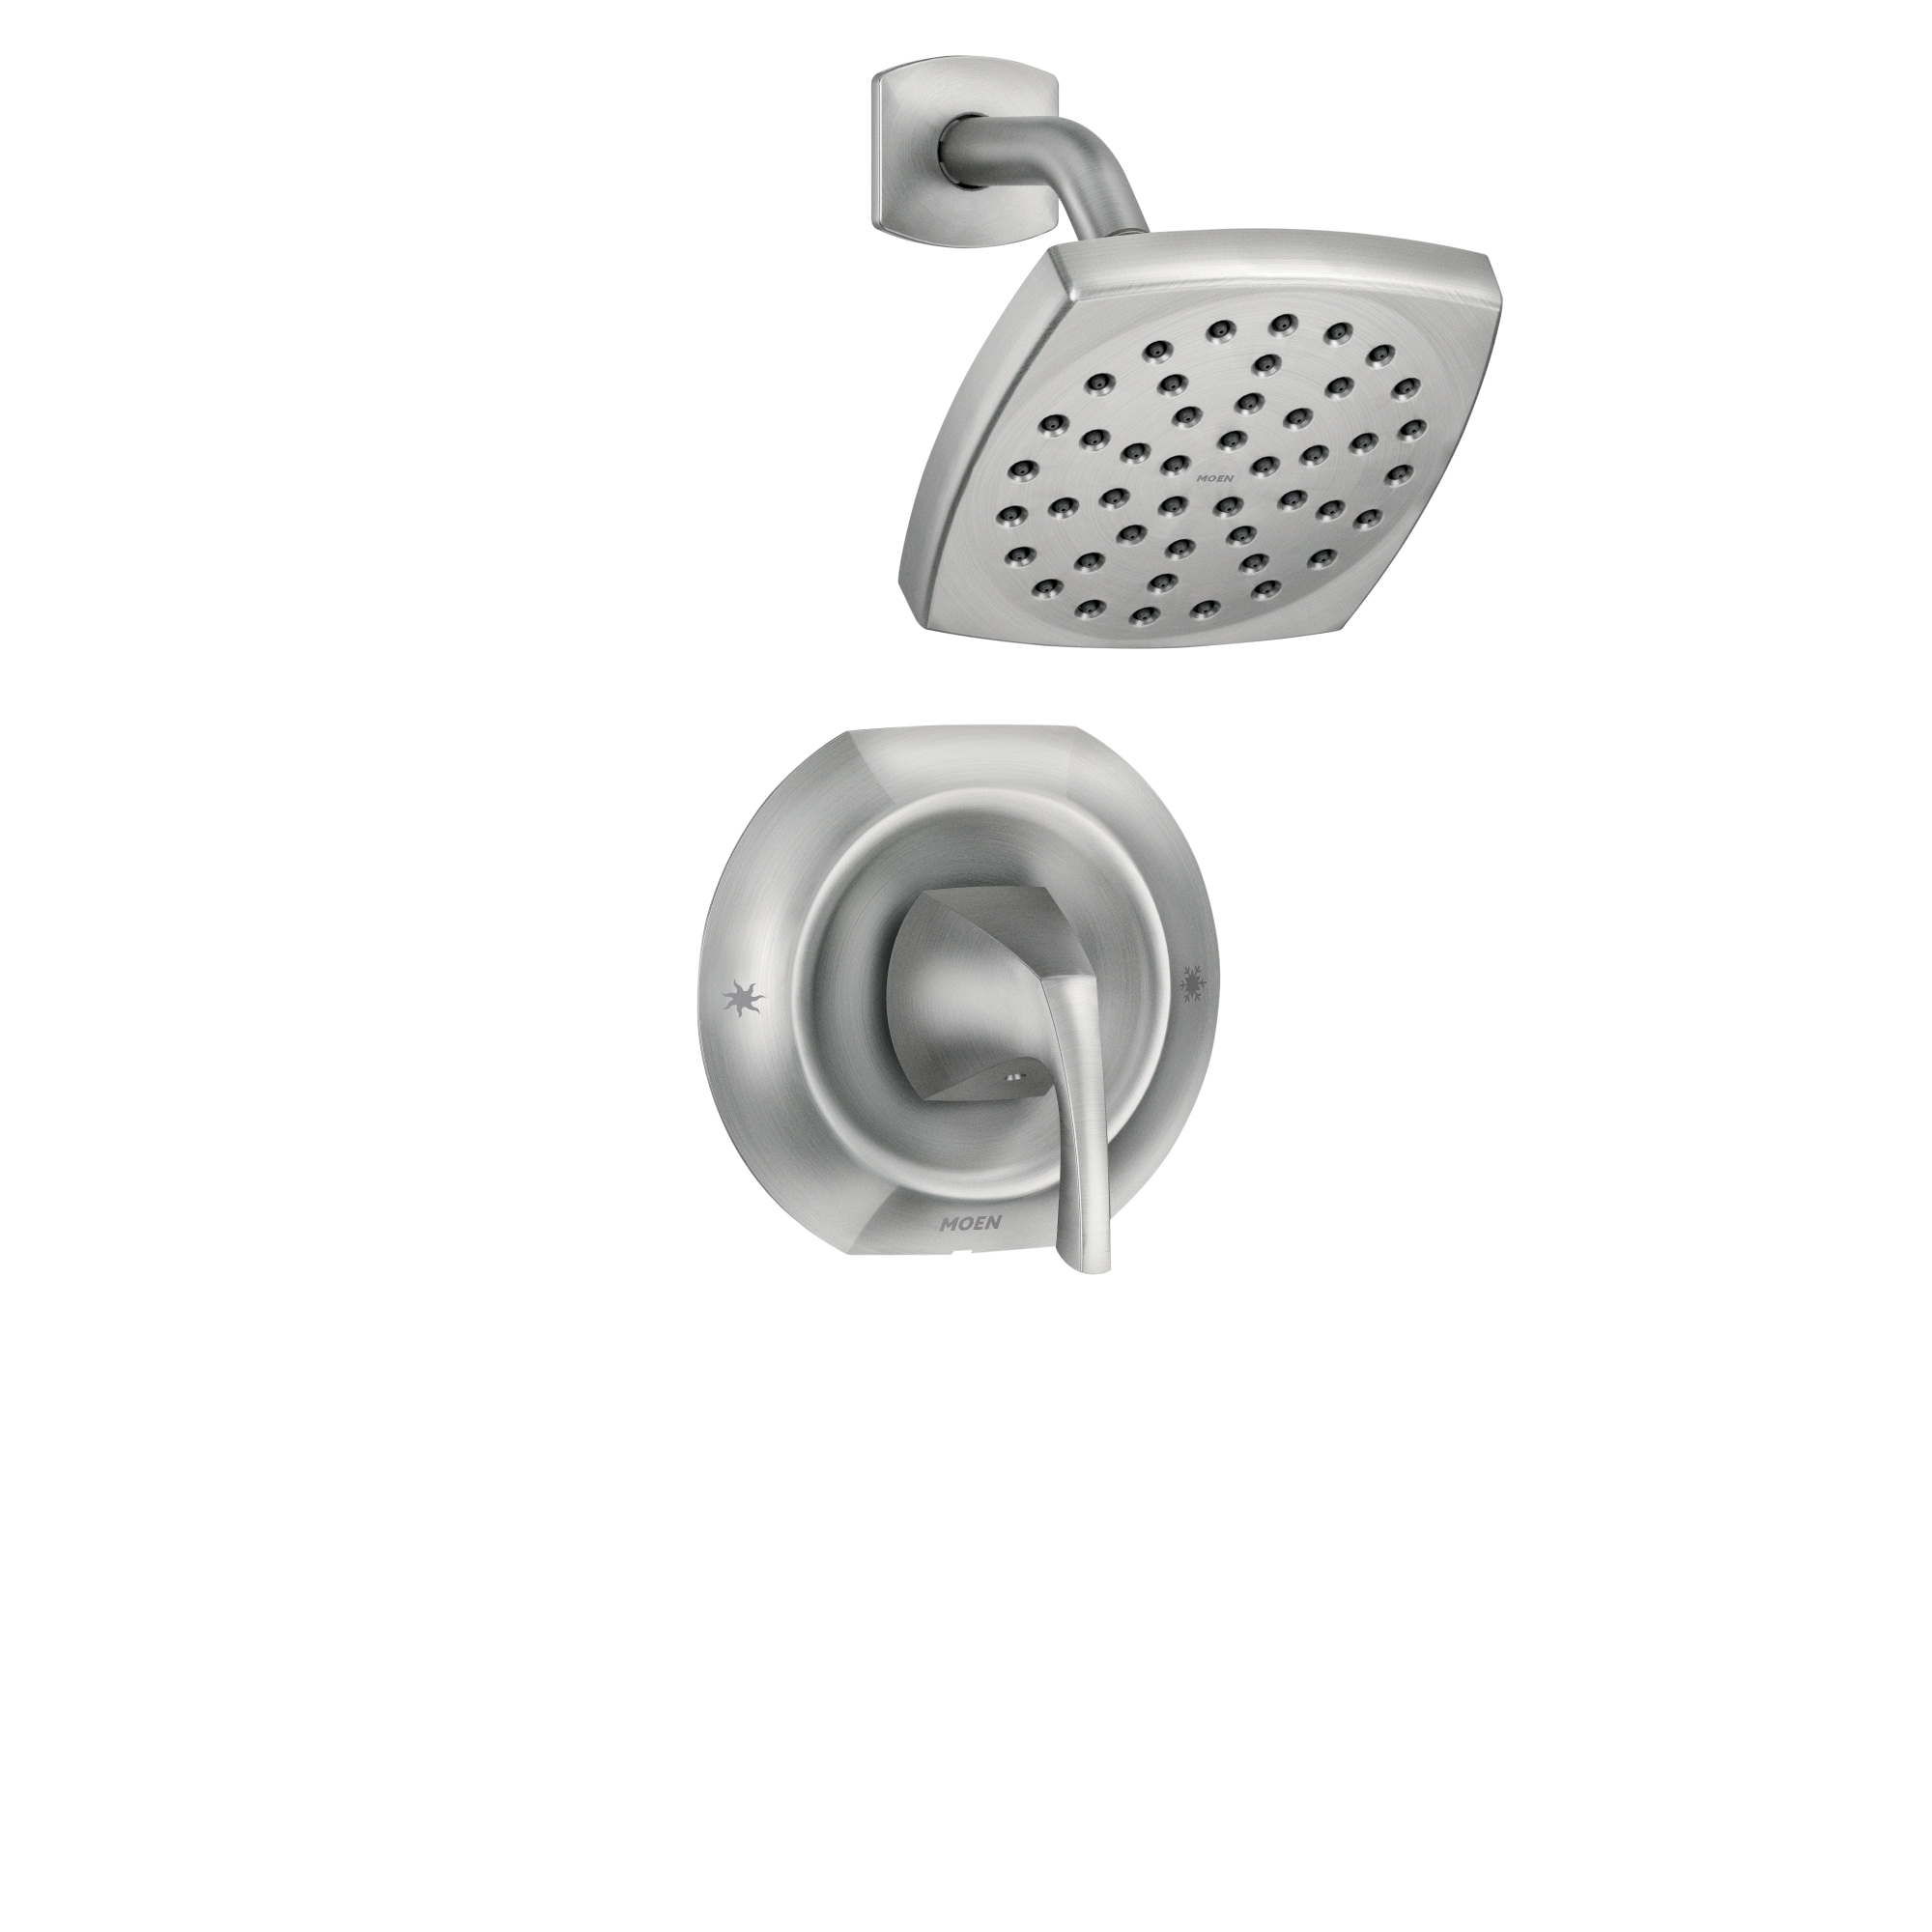 Moen Lindor Shower Head and Lever Handle Set, Spot Resist Brushed Nickel 1- handle Single Function Square Shower Faucet Valve Included in the Shower  Faucets department at